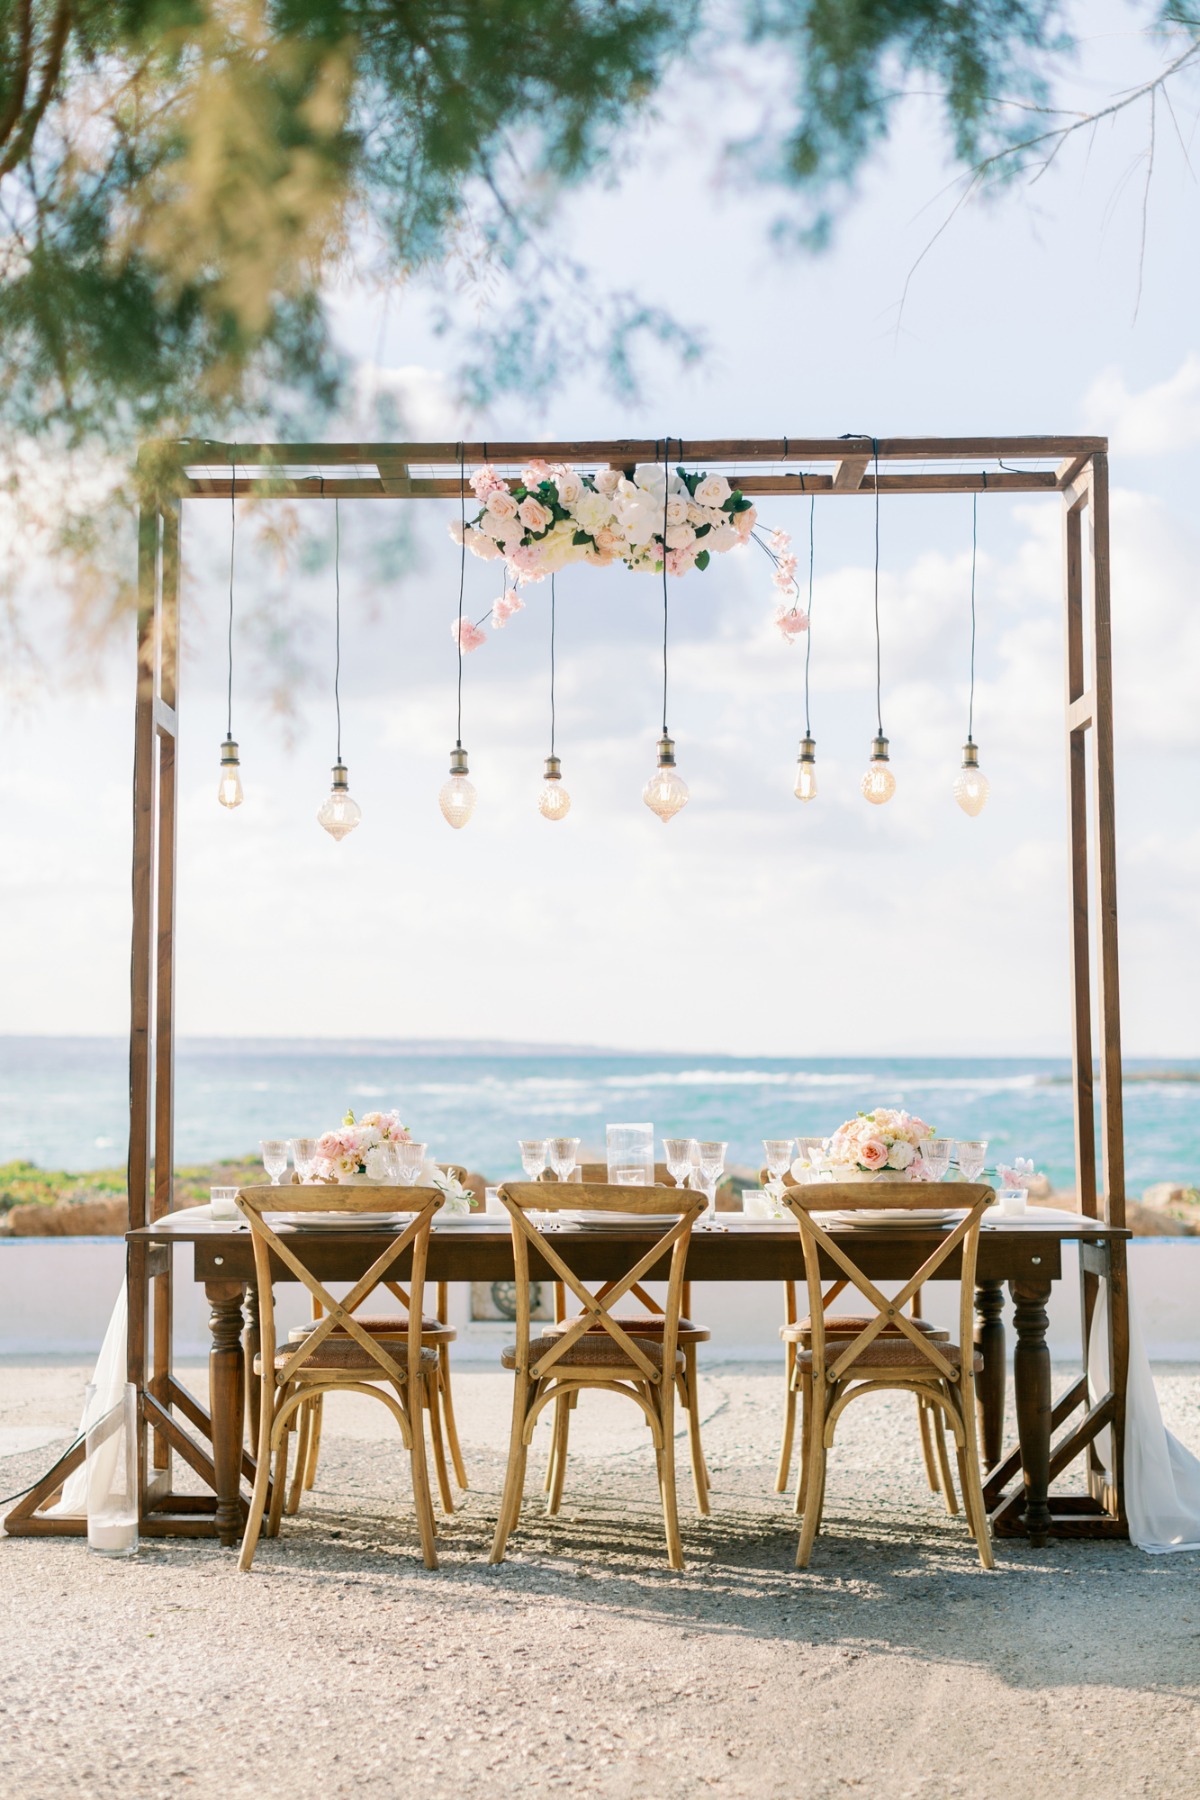 There's A Formula For The Perfect Beach Wedding...And Here It Is